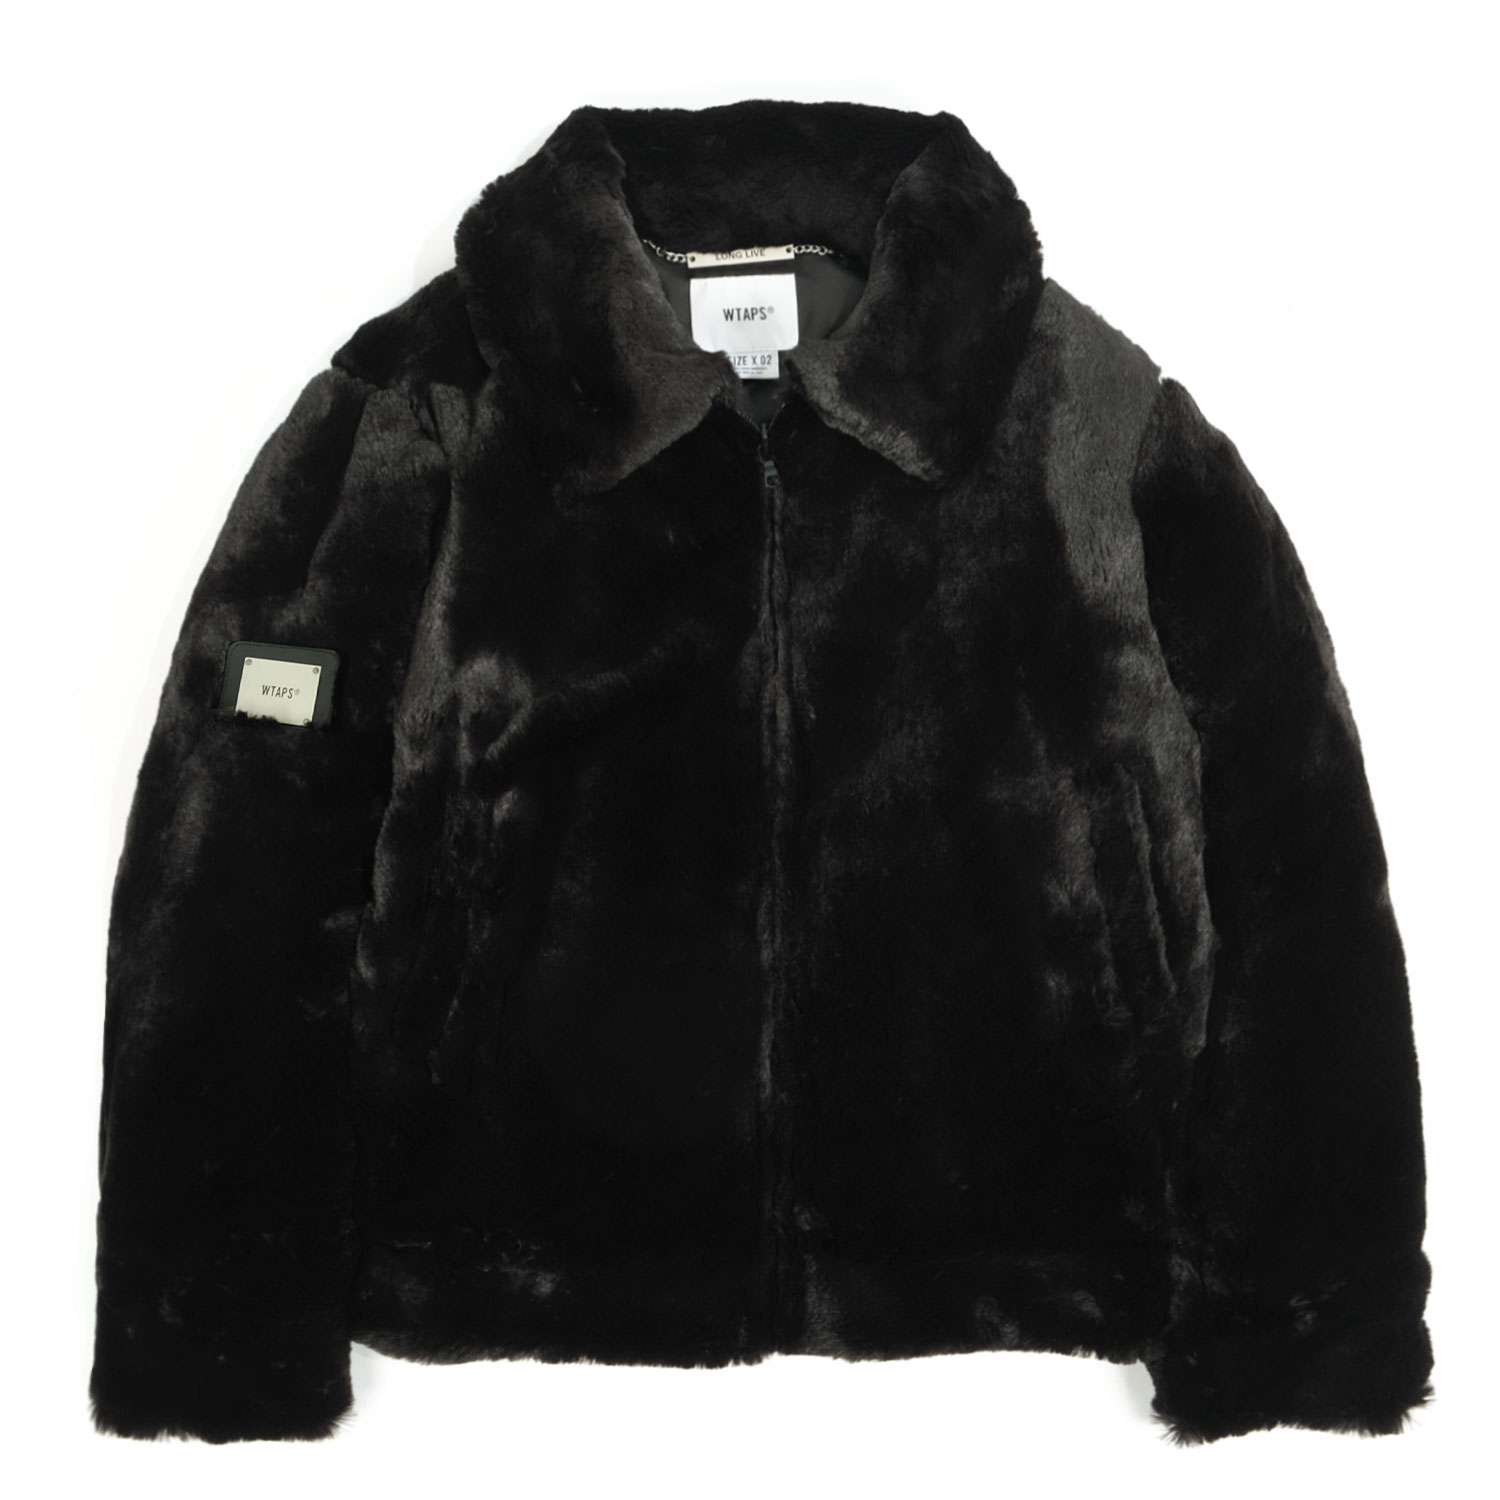 WTAPS GRIZZLY JACKET ファー ジャケット ダブルタップス